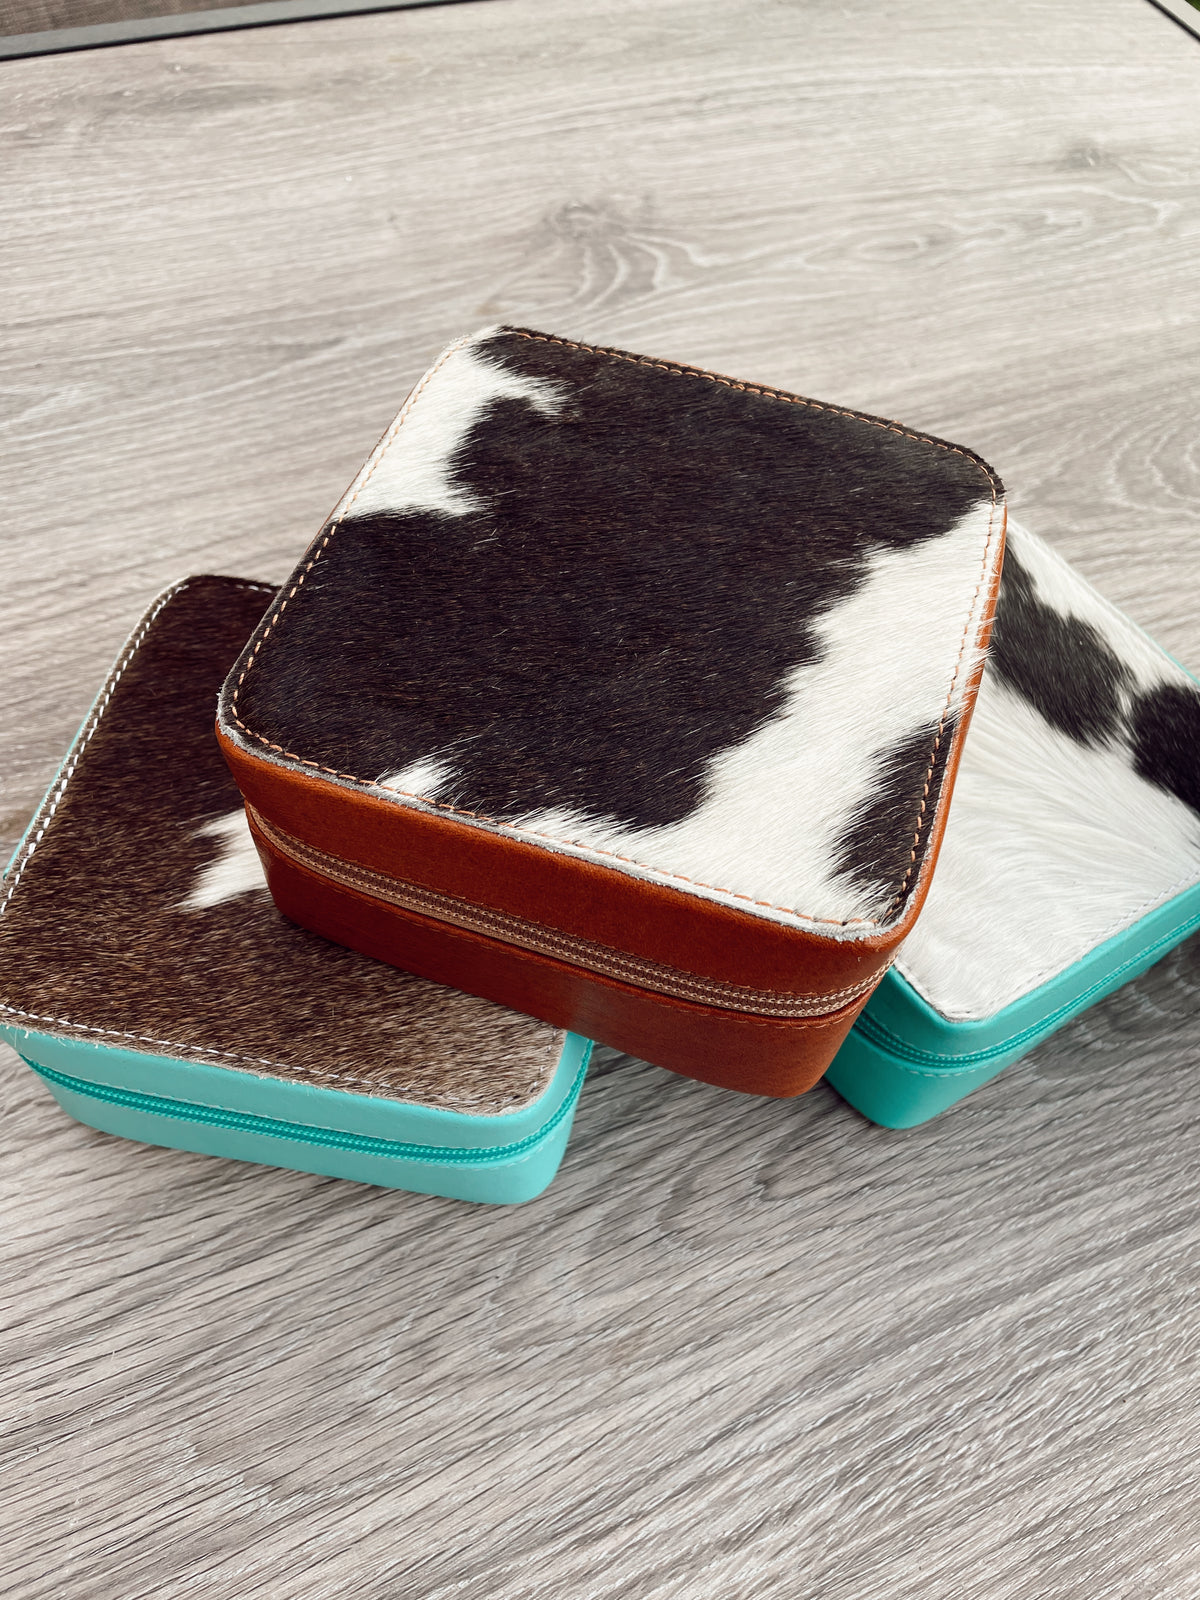 Leather Cowhide Jewelry Box